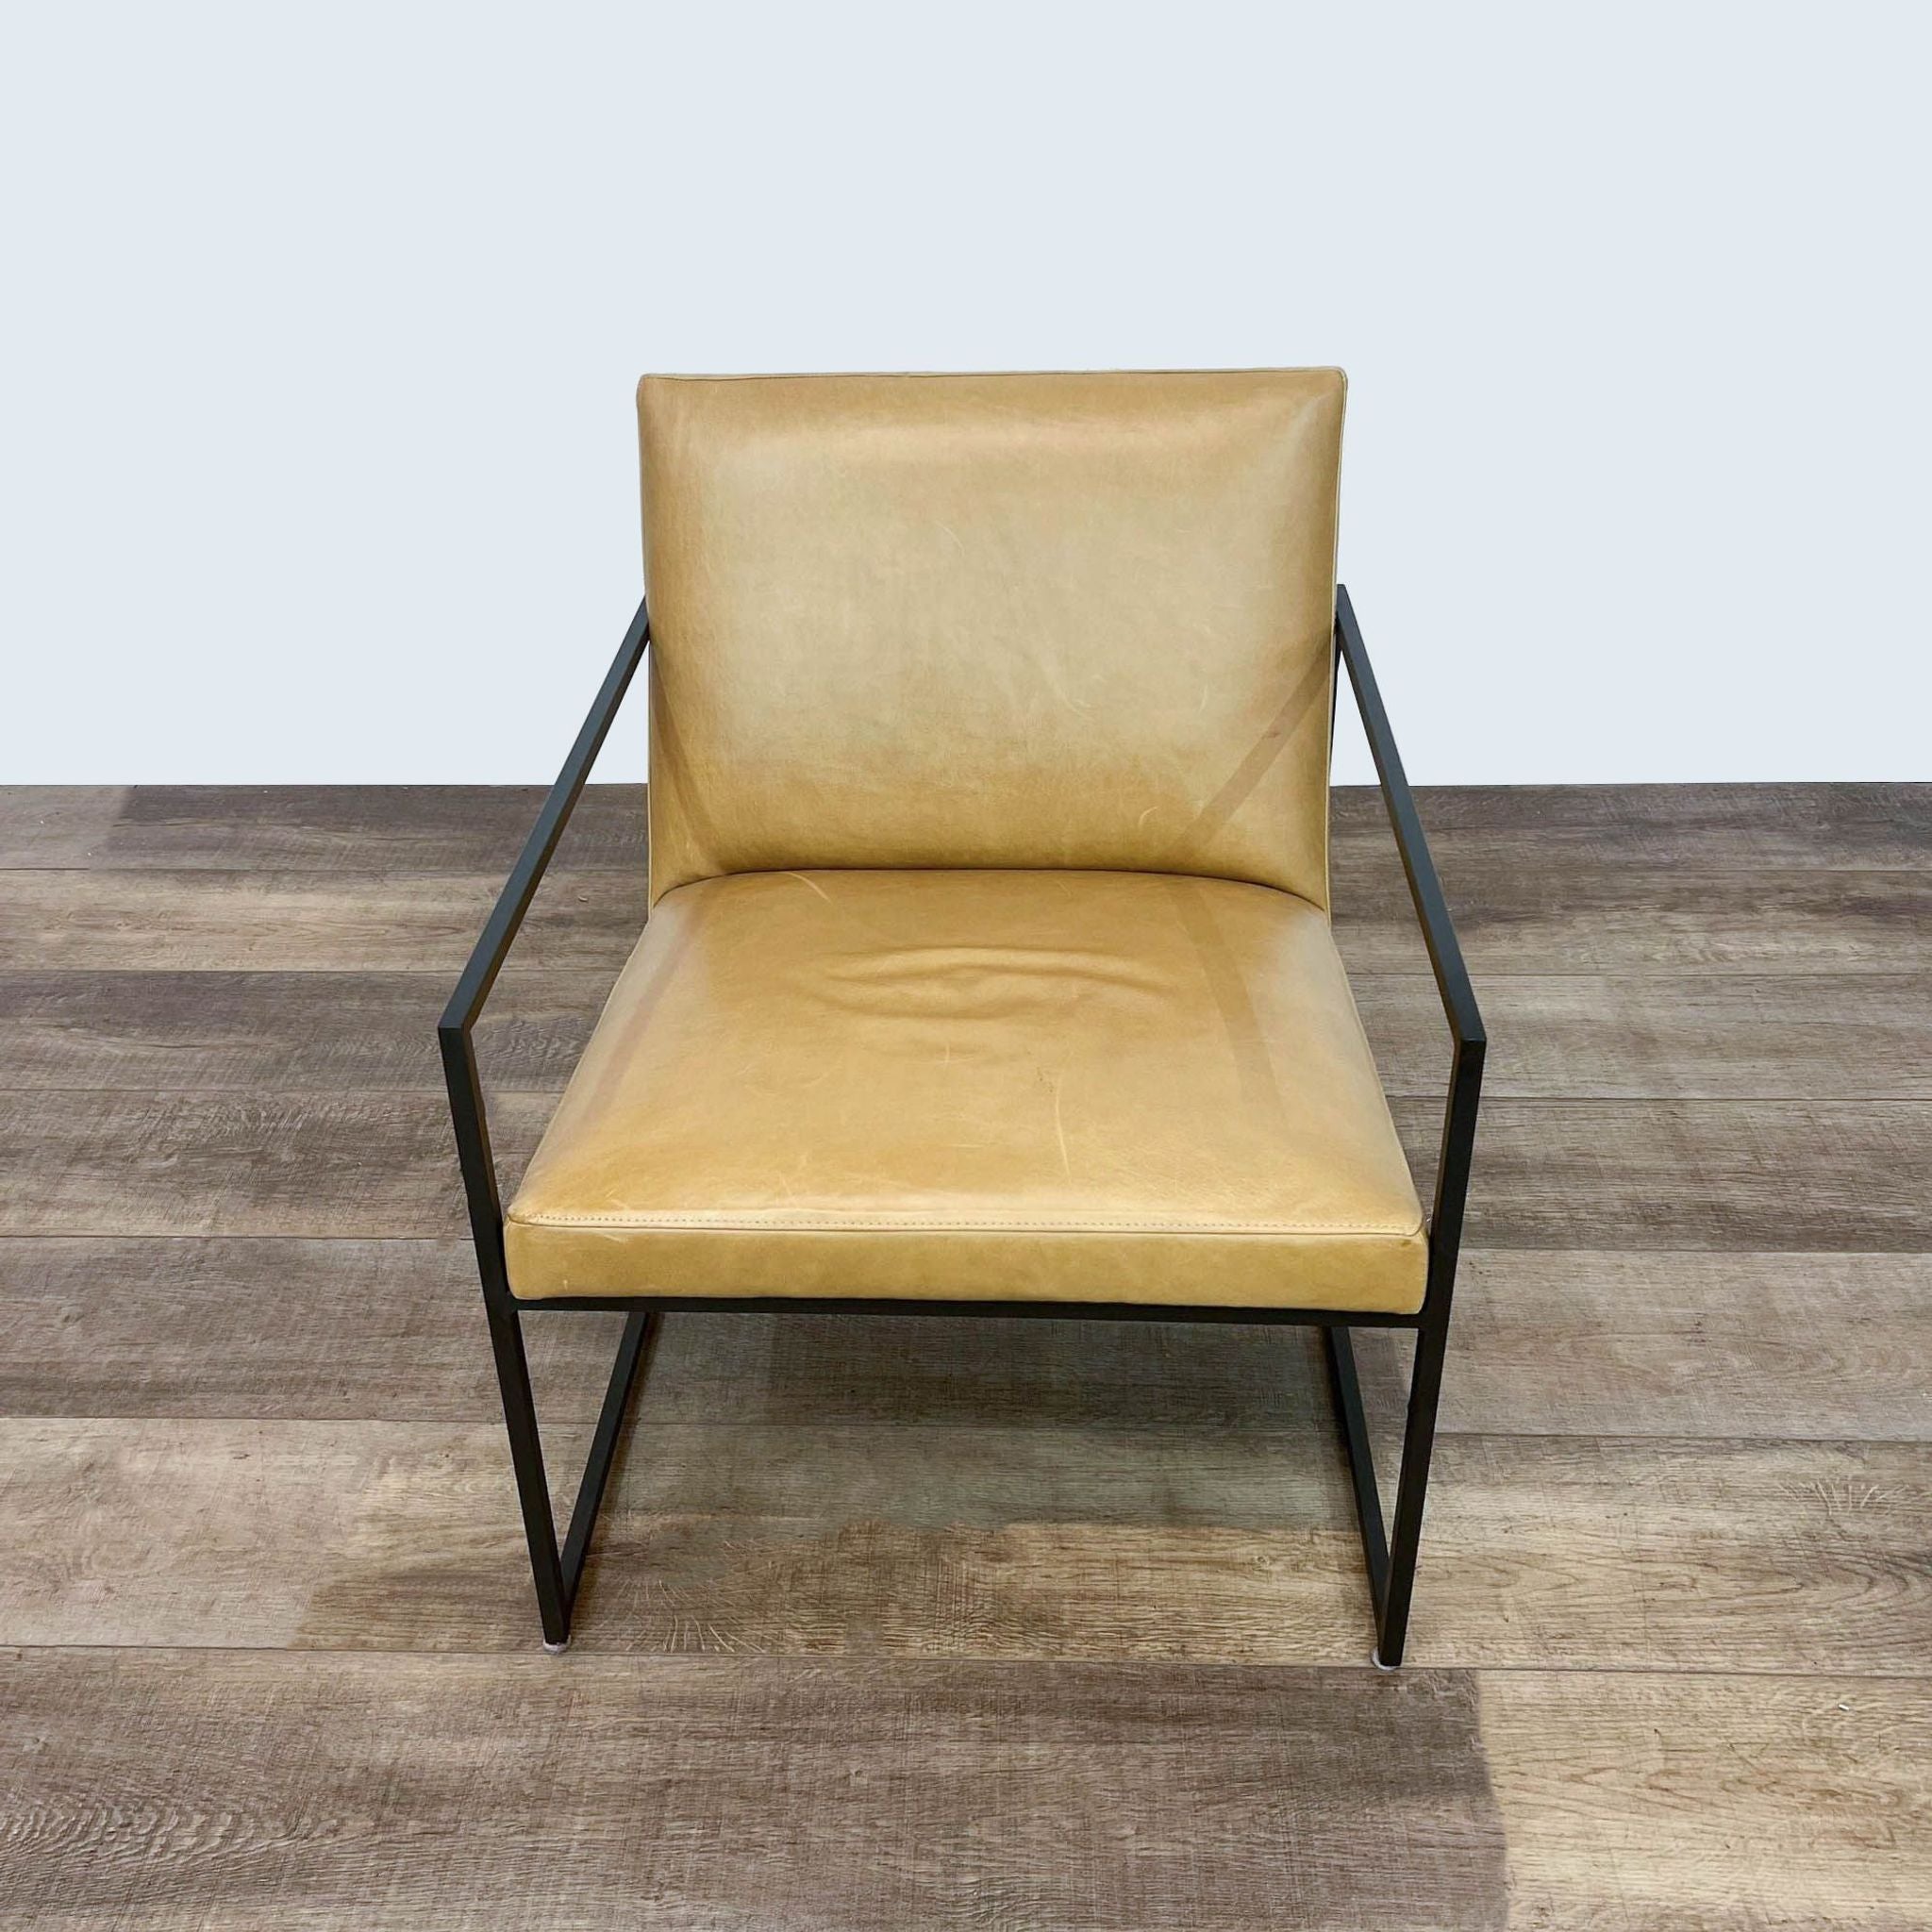 Room & Board Novato armchair with thin-profile leather seat and natural steel frame on a wooden floor.